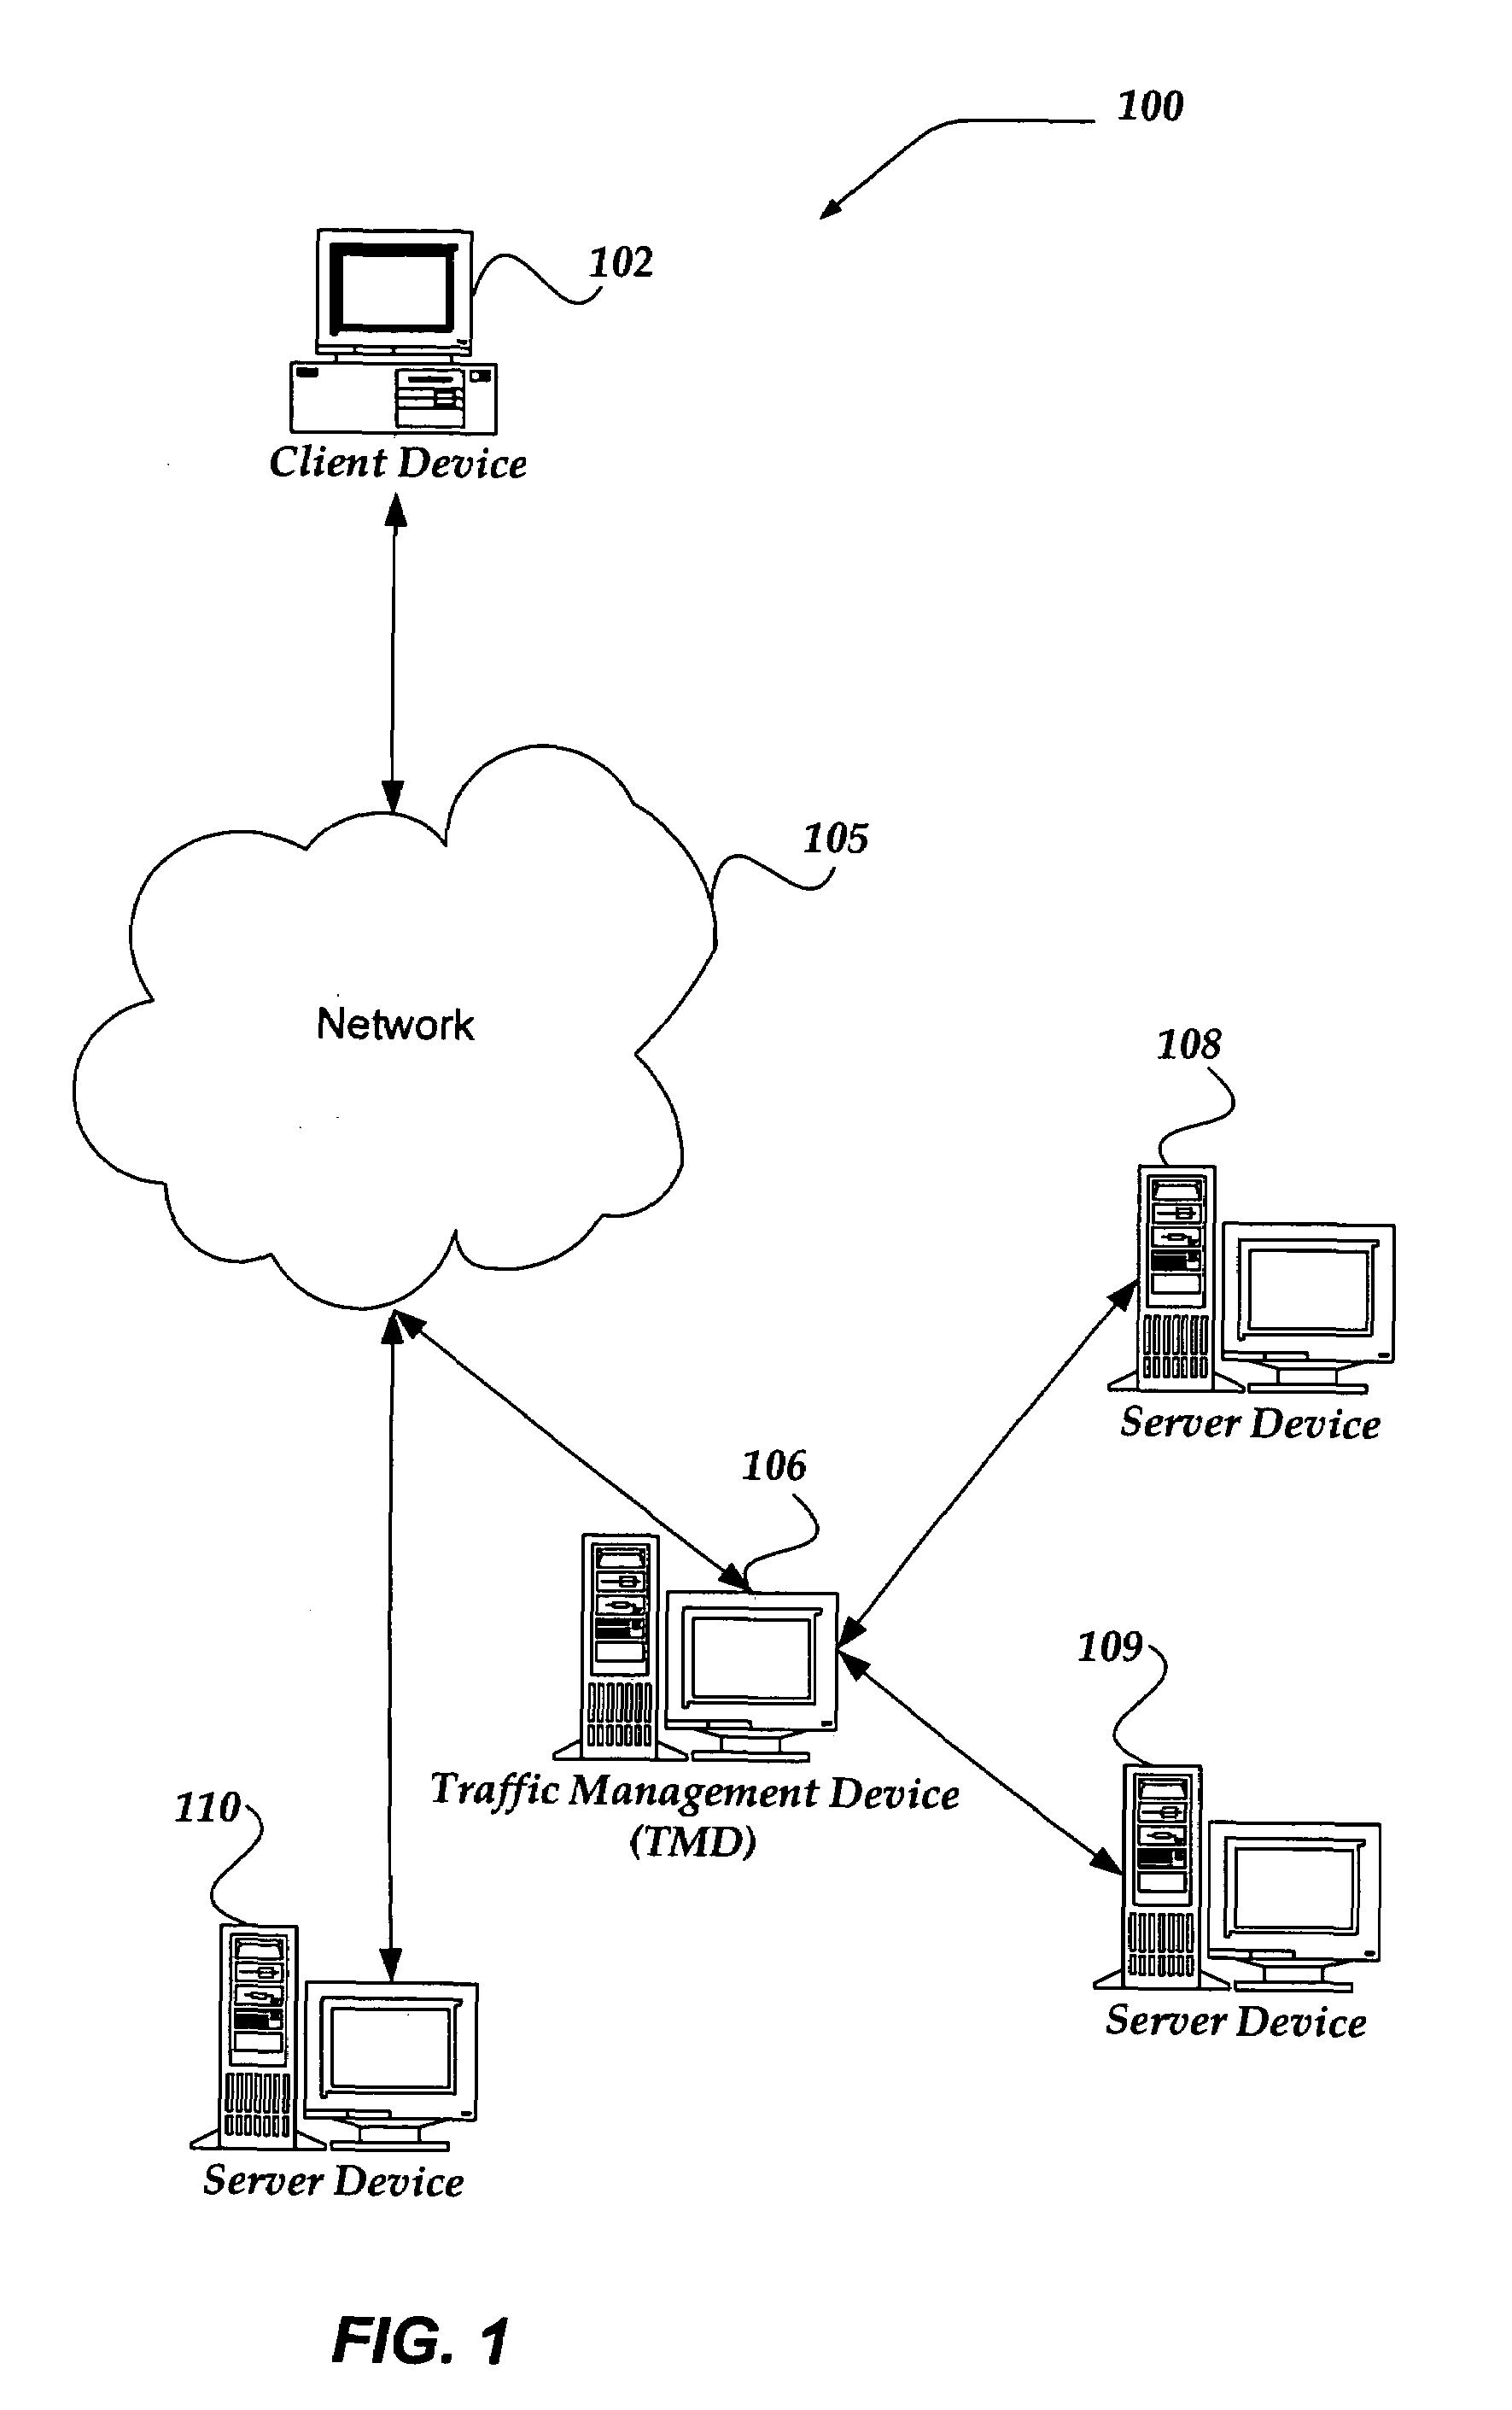 Selectively enabling network packet concatenation based on metrics